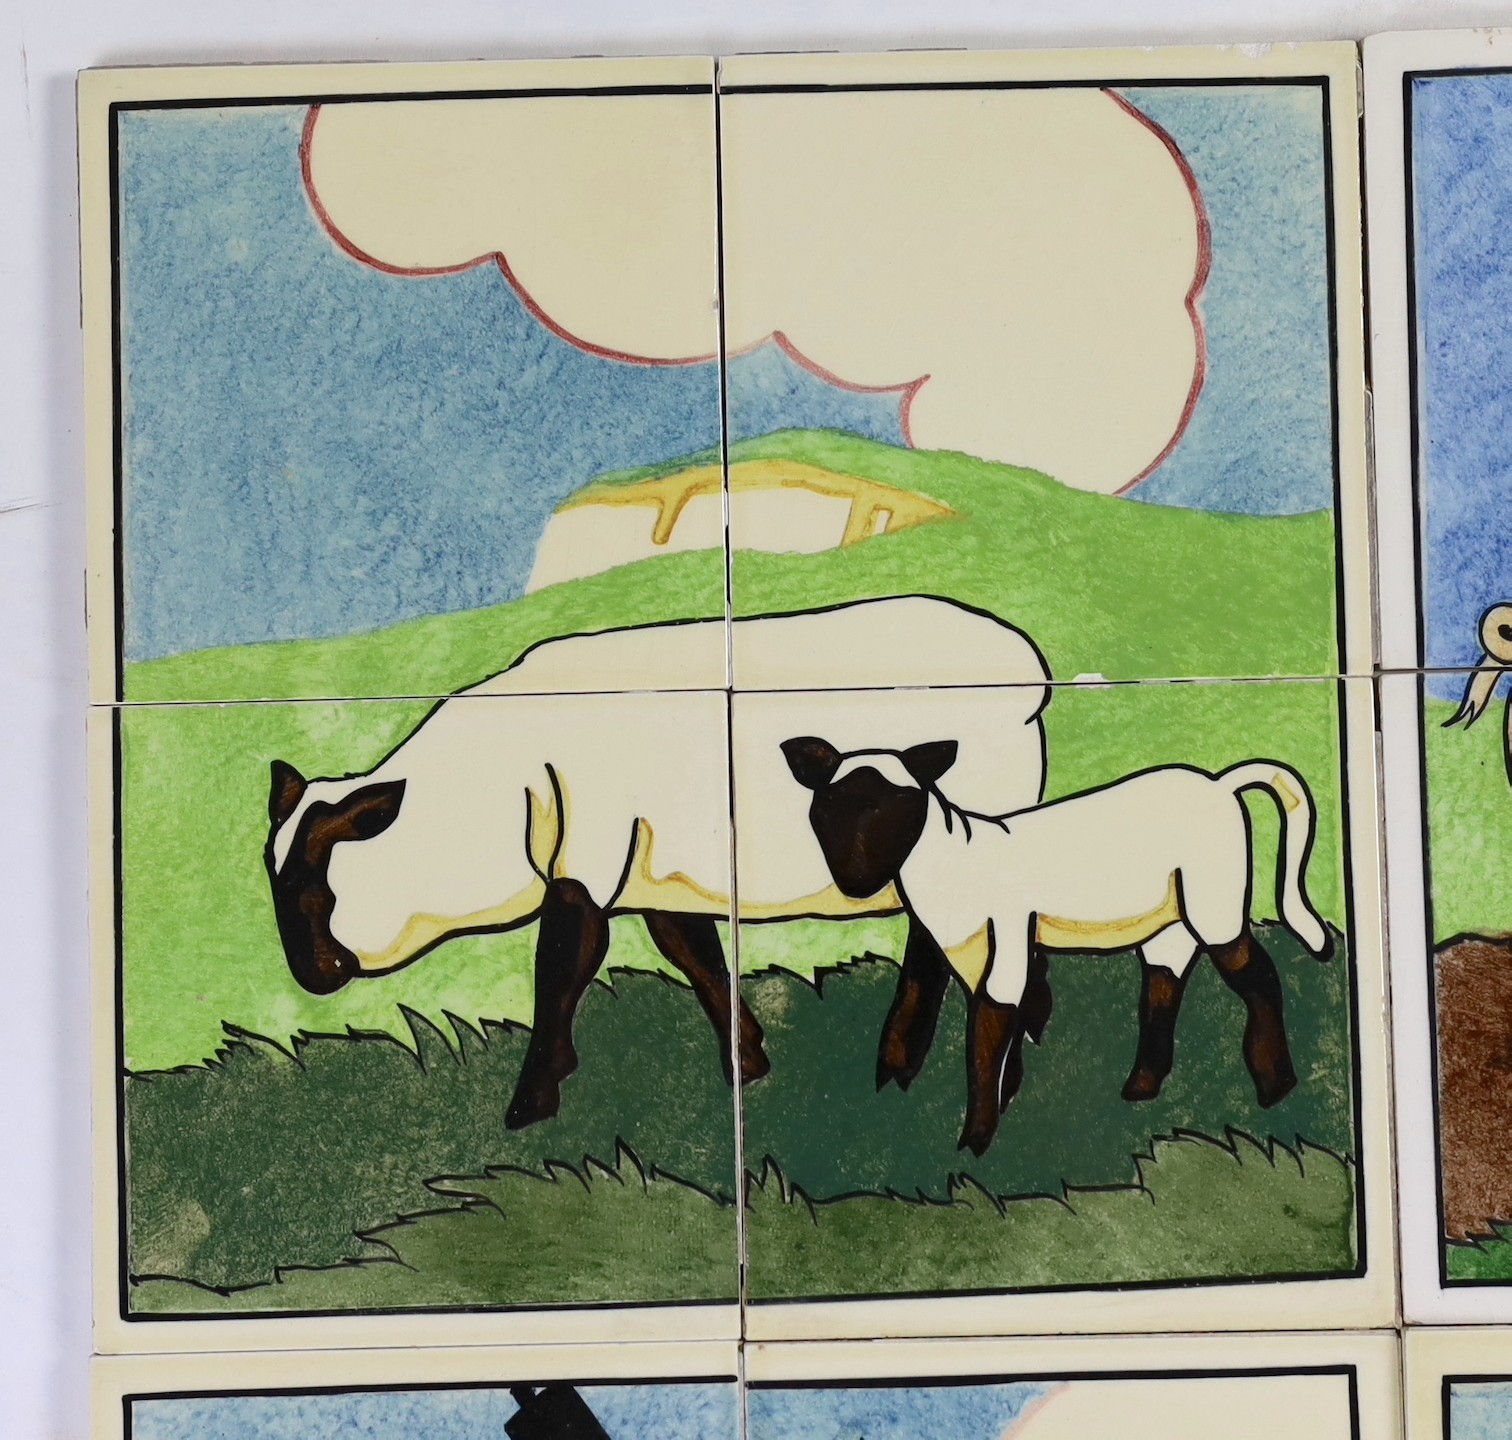 E.E. Strickland for Carter & Co, Poole pottery, six sets of four tile panels of animals and farm scenes, each tile 15.2cm (6in.) square and each set of four tiles 61cm square, minor faults